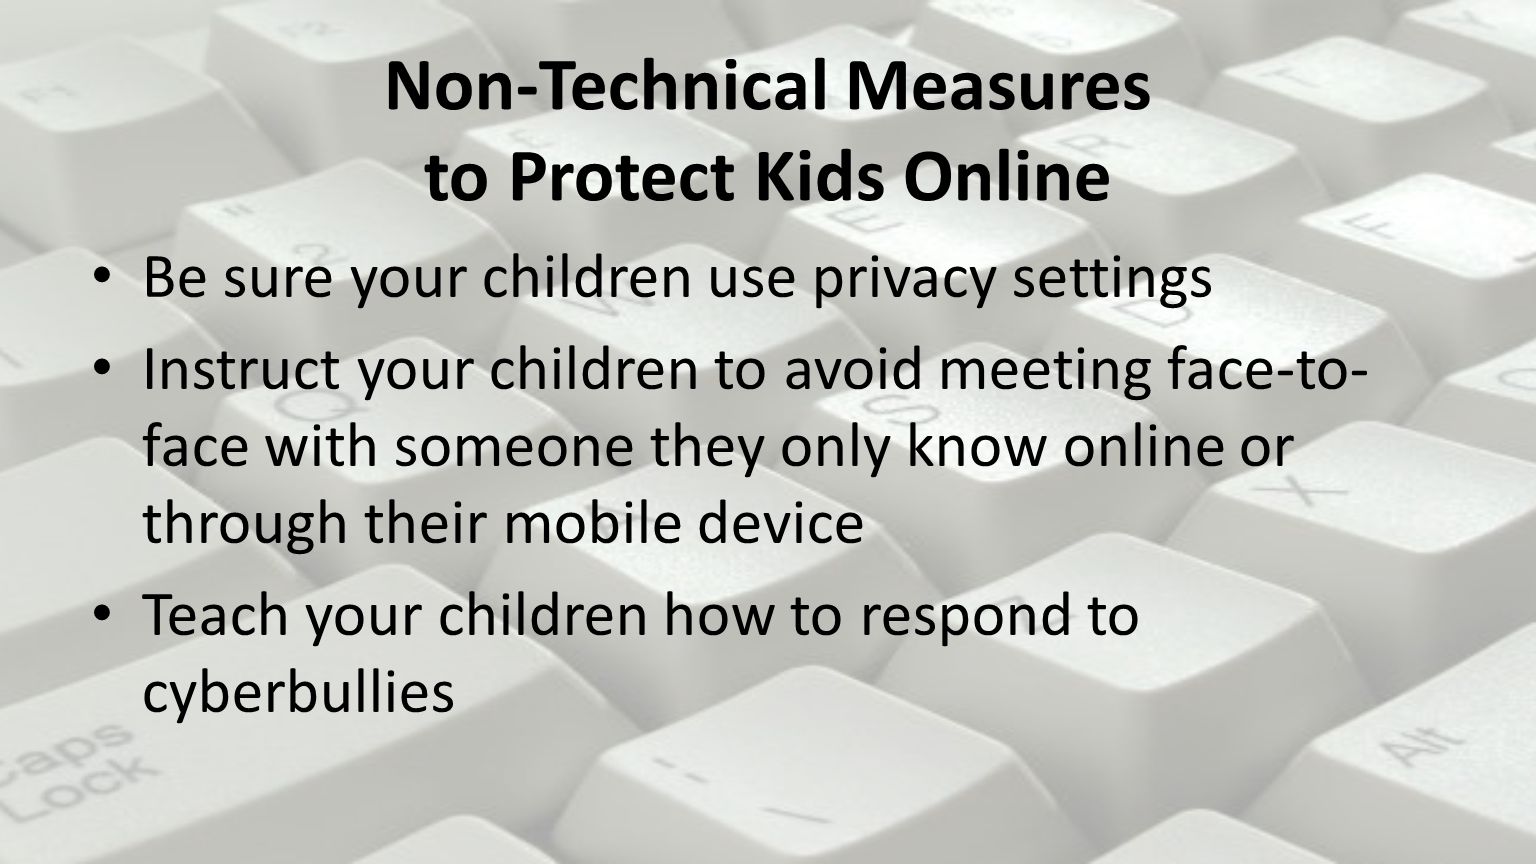 Non-Technical Measures to Protect Kids Online Be sure your children use privacy settings Instruct your children to avoid meeting face-to- face with someone they only know online or through their mobile device Teach your children how to respond to cyberbullies